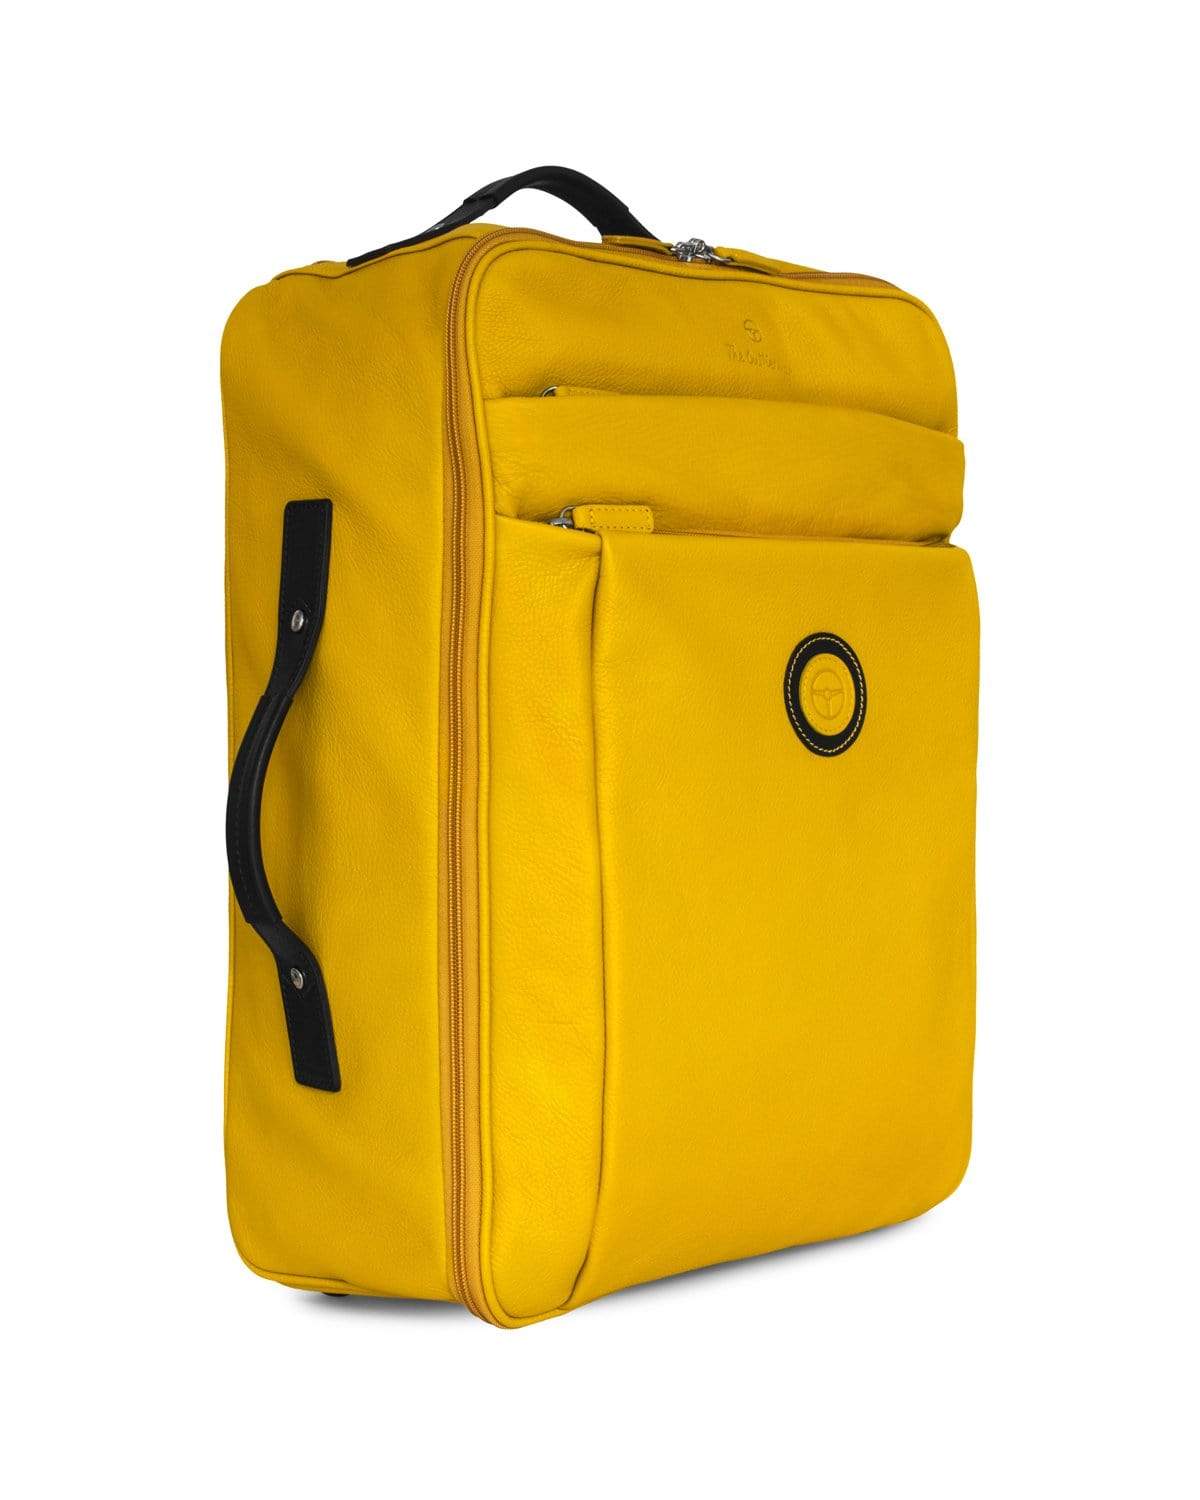 Car-Shaped Trolley Bag: Travel in Style with Your Perfect Travel Compa